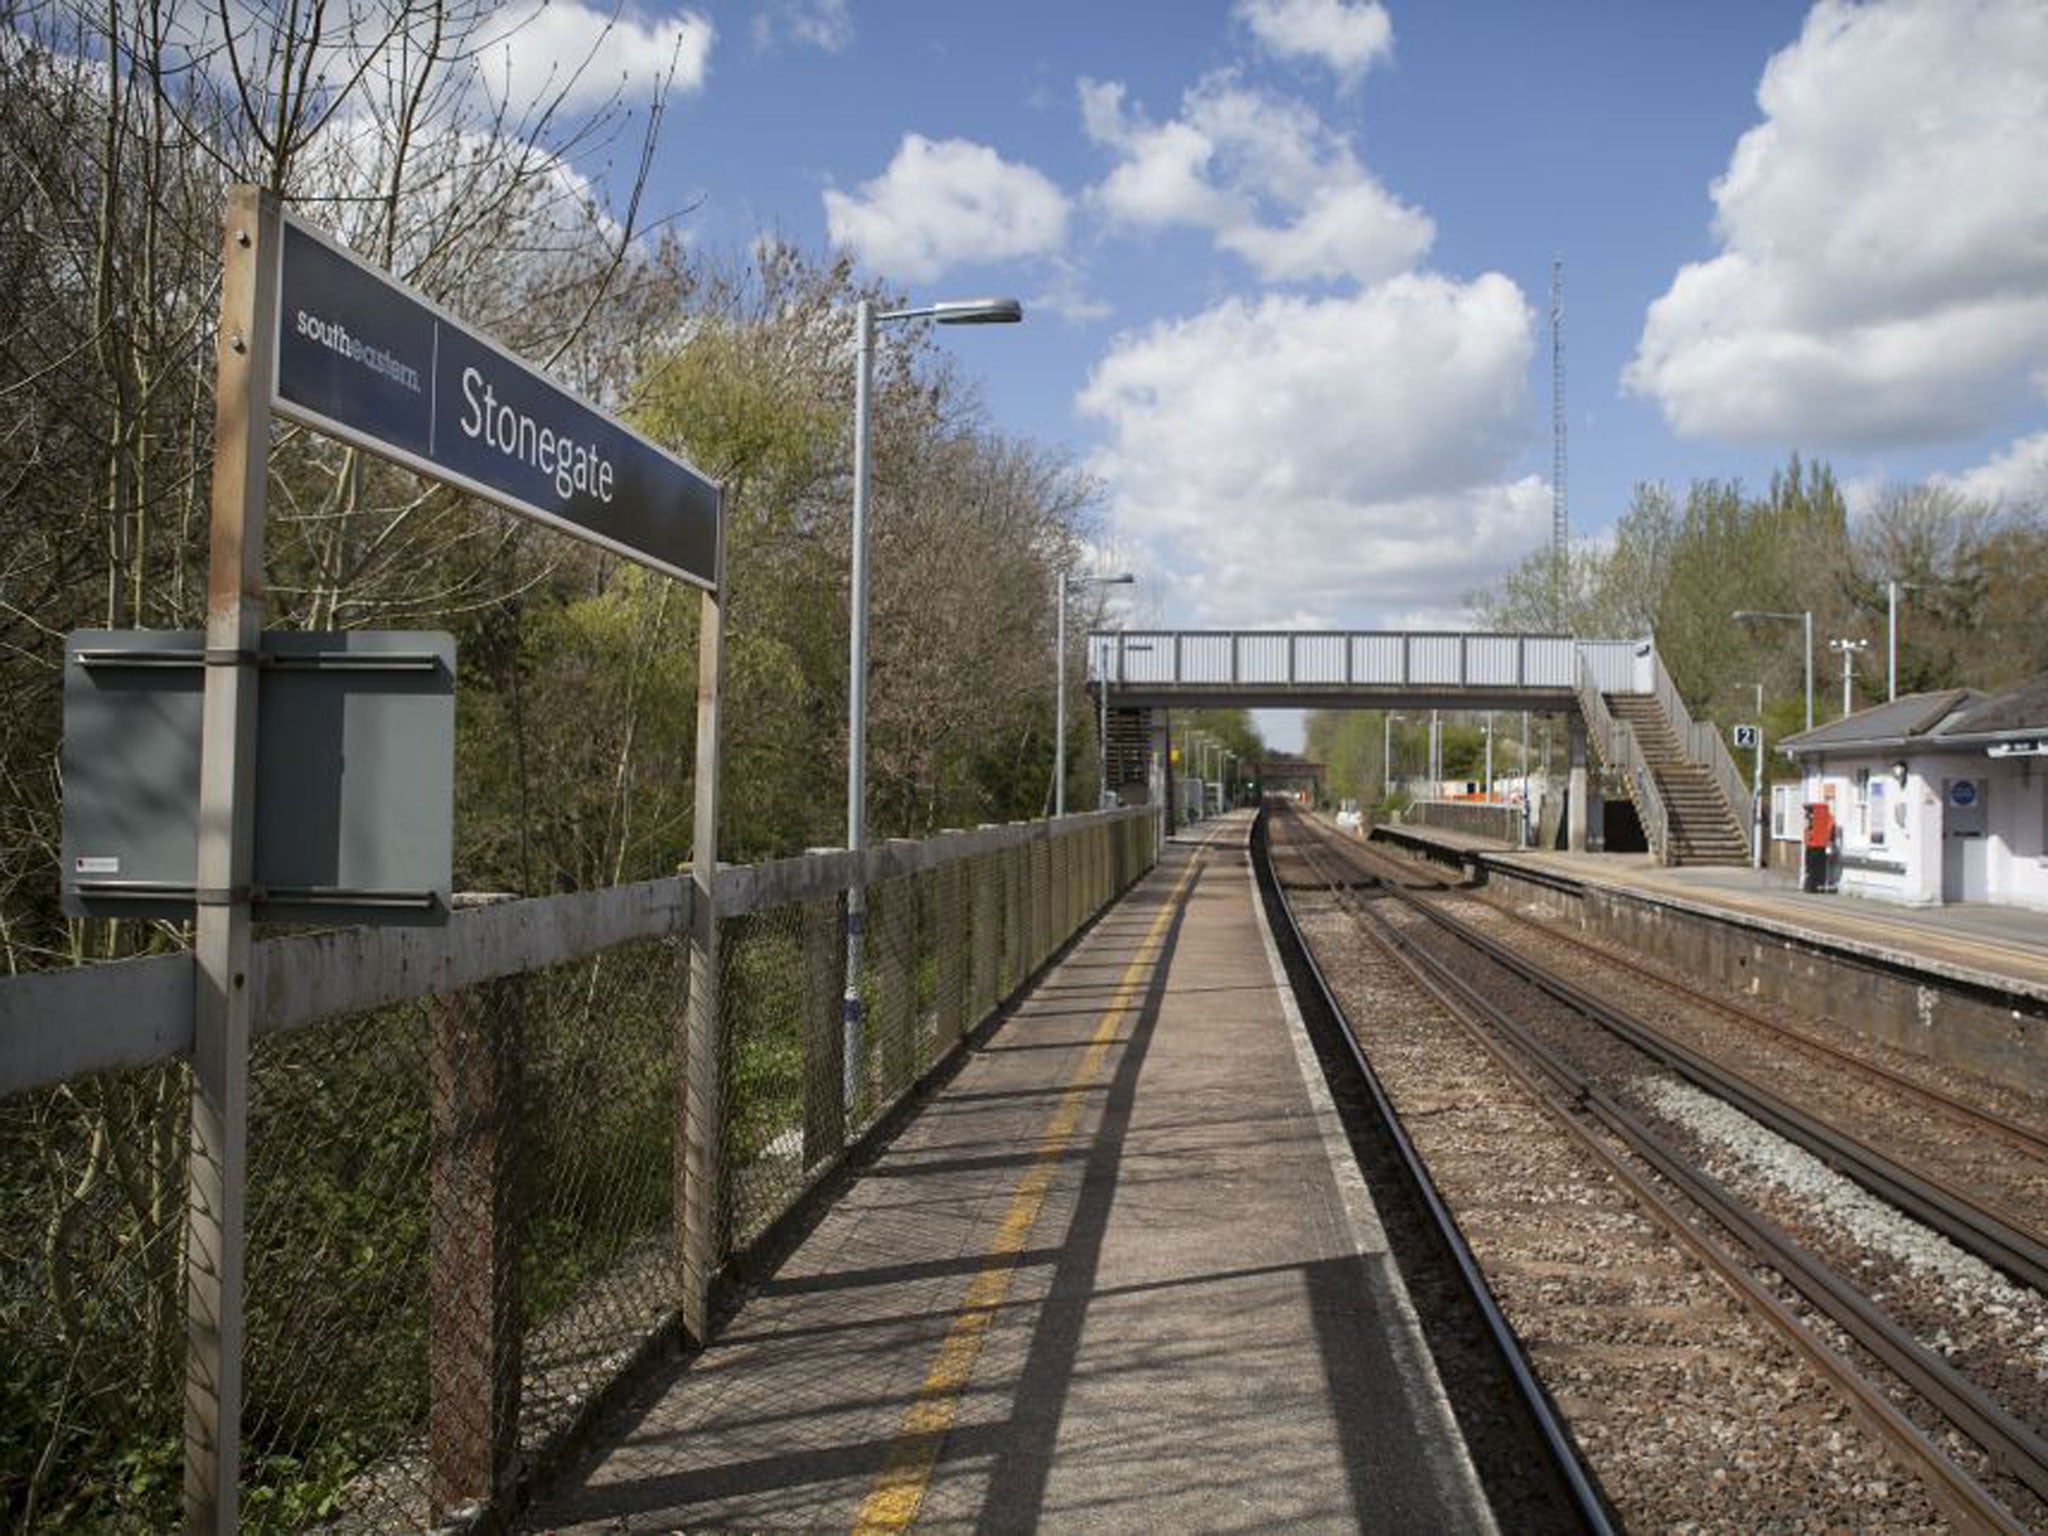 Stonegate train station in East Sussex where a hedge fund manager avoided paying for his ticket